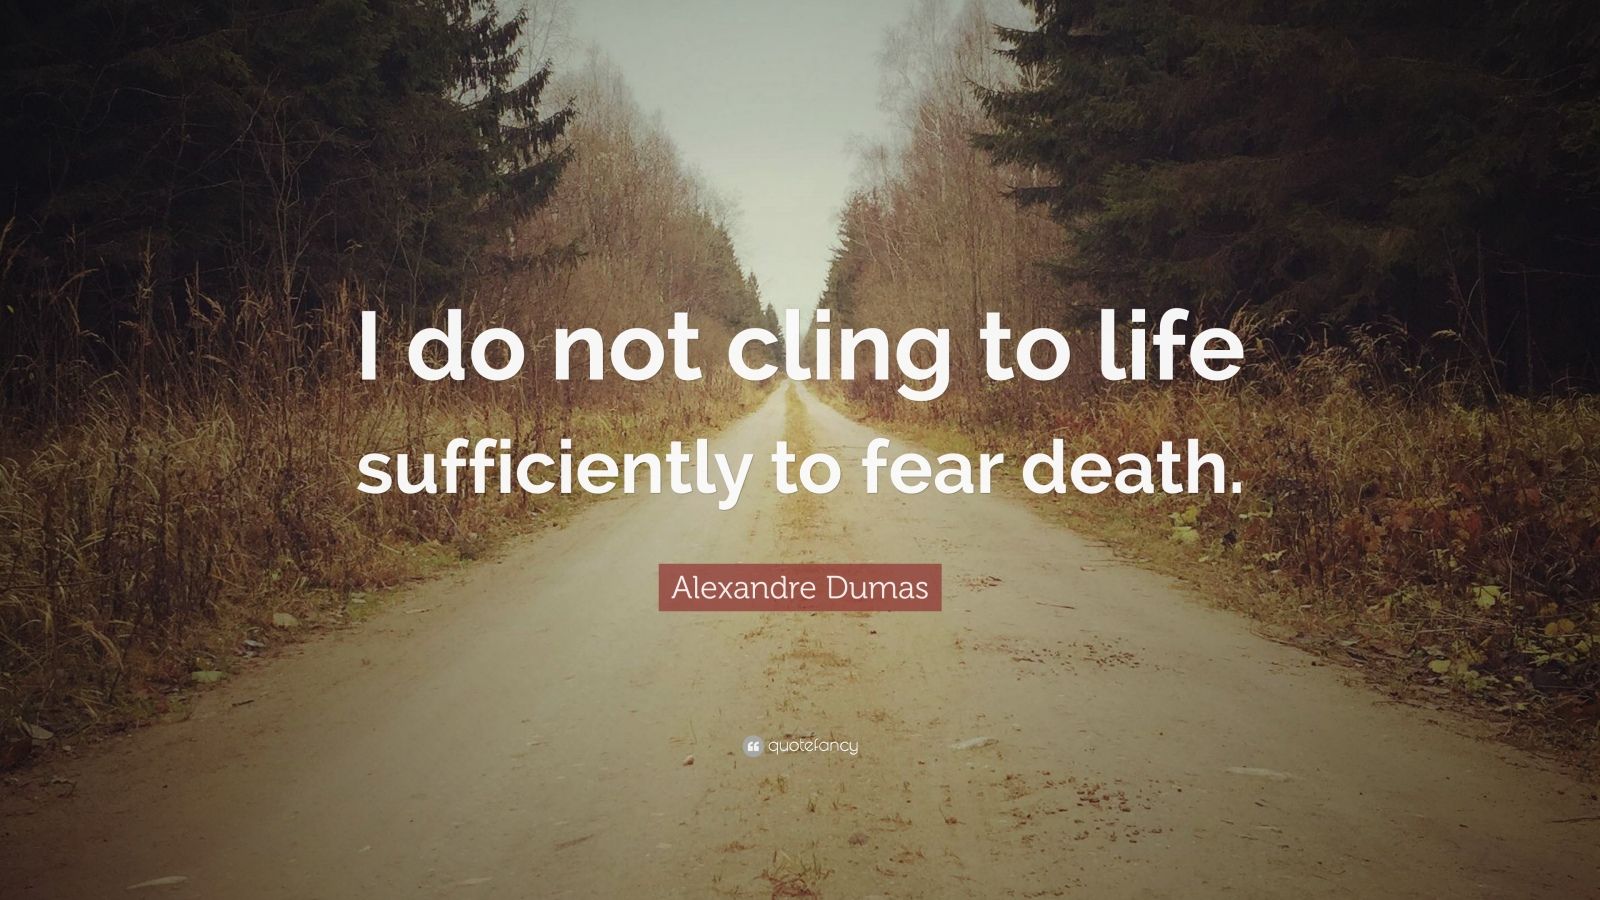 Alexandre Dumas Quote: “I do not cling to life sufficiently to fear ...